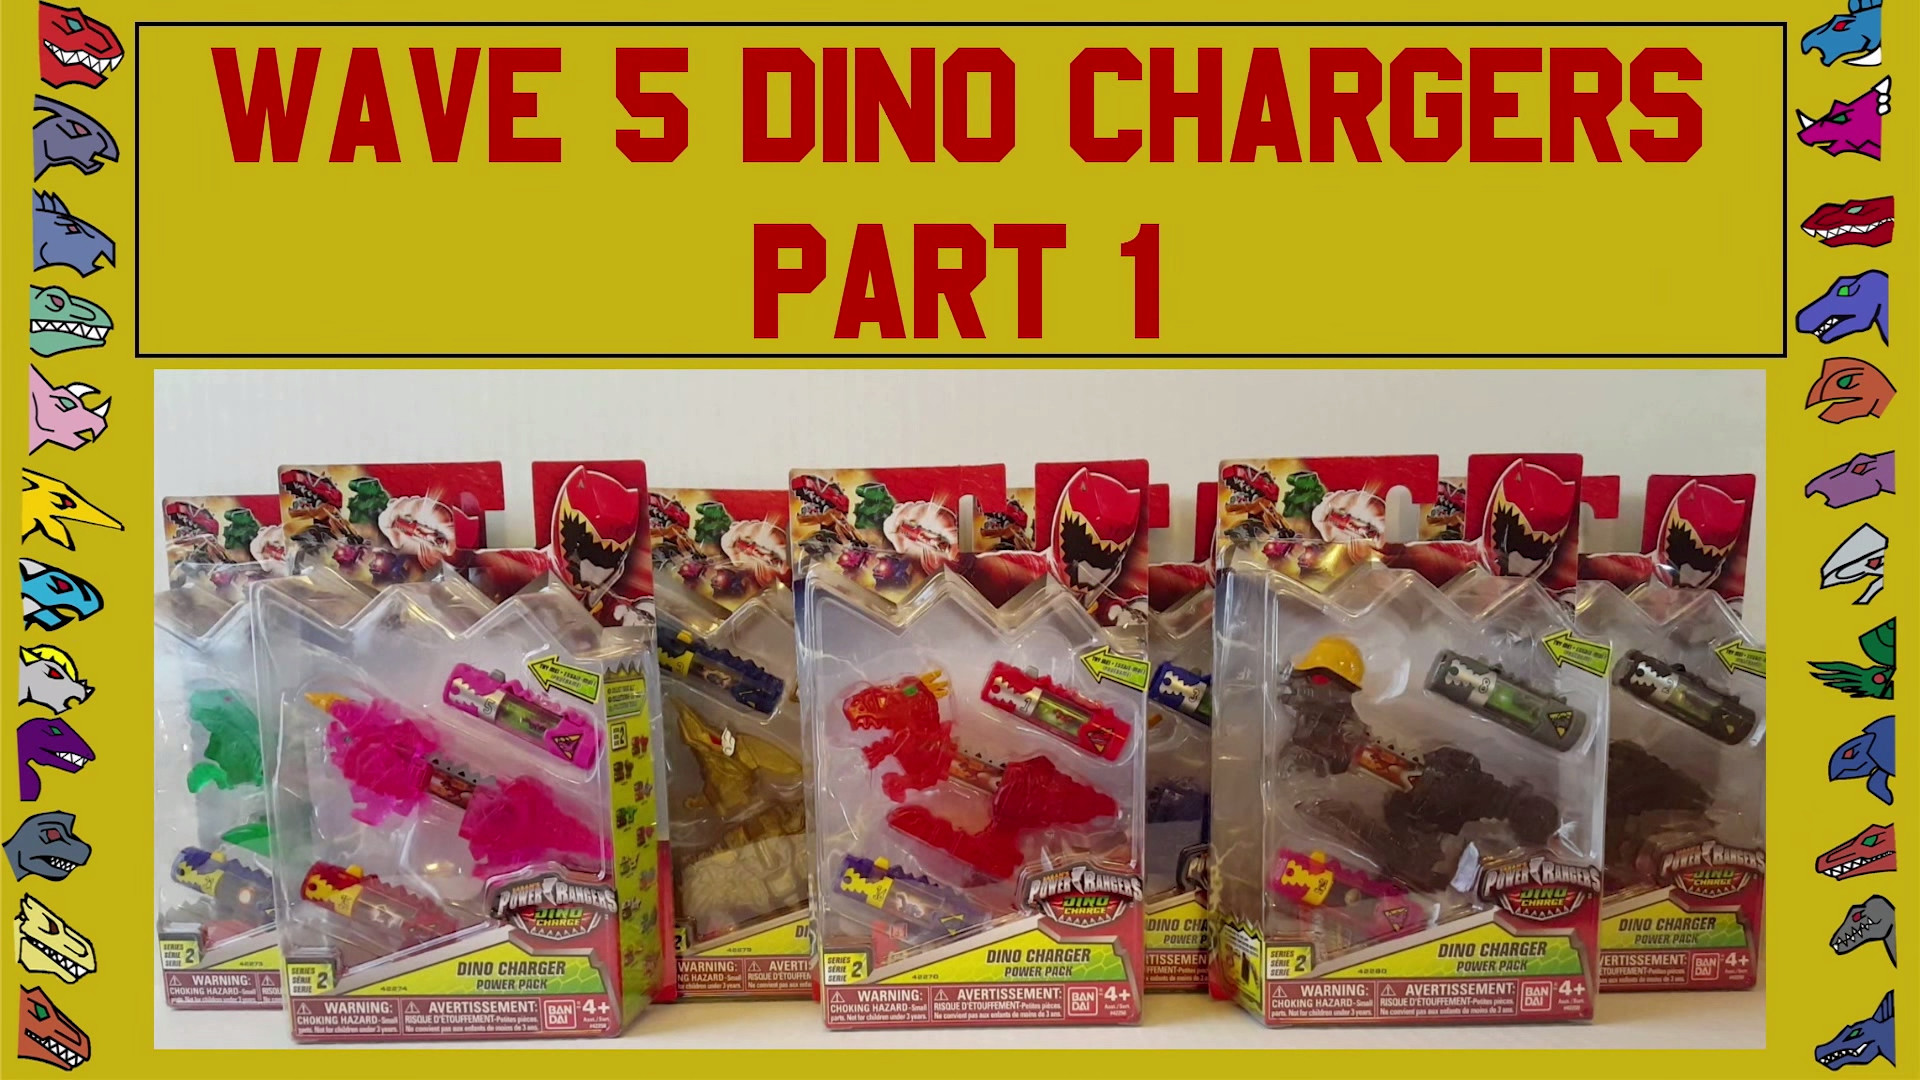 Download. The gimmick for Power Rangers Dino Charge